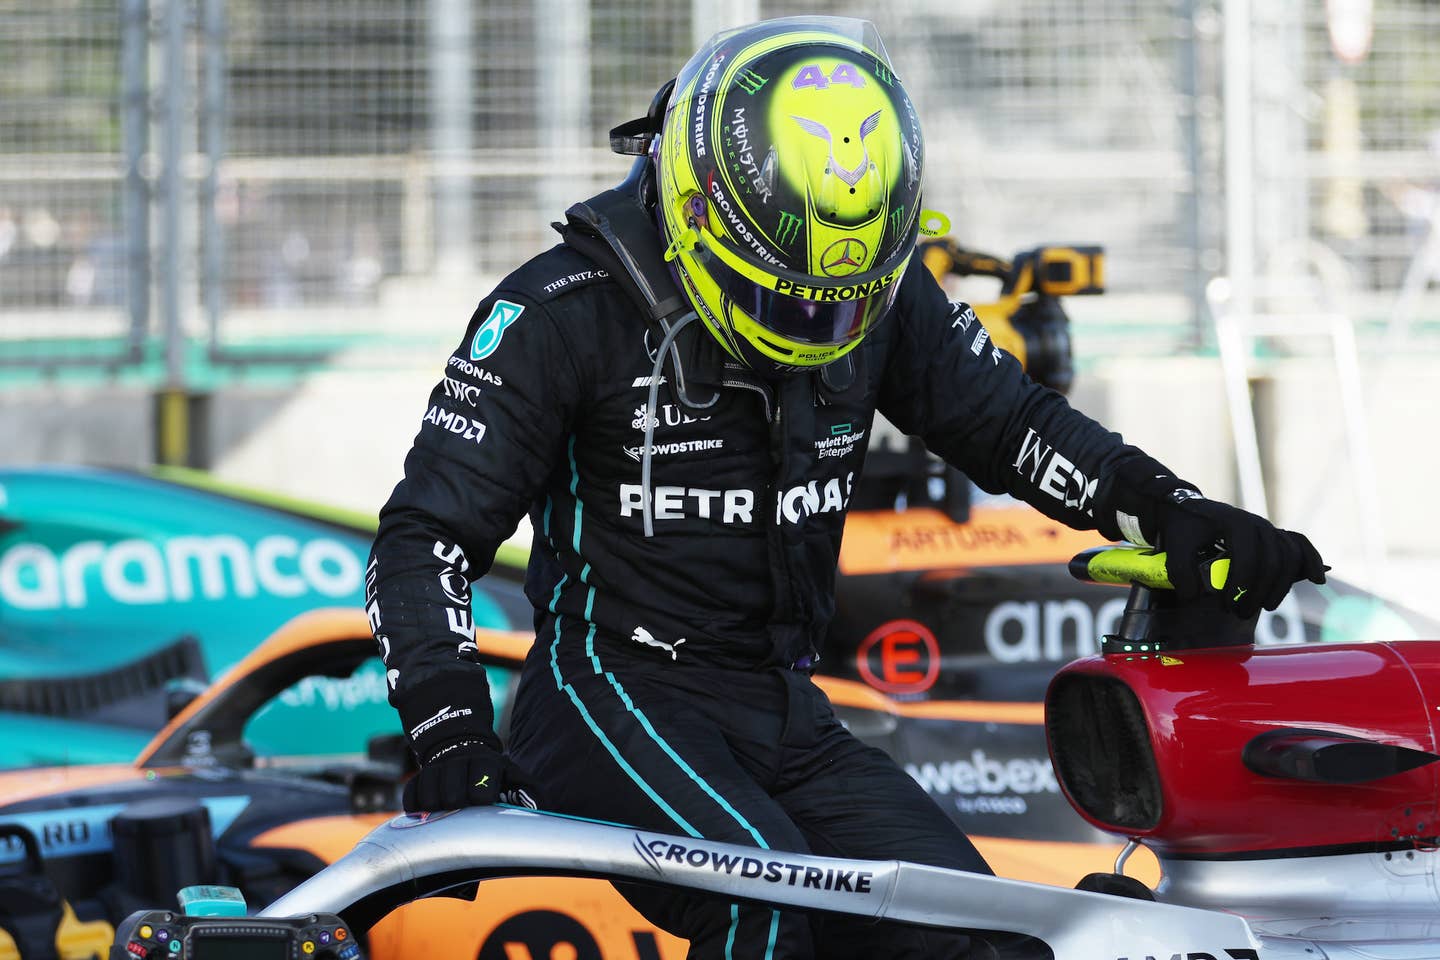 BAKU, AZERBAIJAN - JUNE 12: Fourth placed Lewis Hamilton of Great Britain and Mercedes climbs from his car after complaining of pain during the F1 Grand Prix of Azerbaijan at Baku City Circuit on June 12, 2022 in Baku, Azerbaijan. (Photo by Bryn Lennon - Formula 1/Formula 1 via Getty Images)